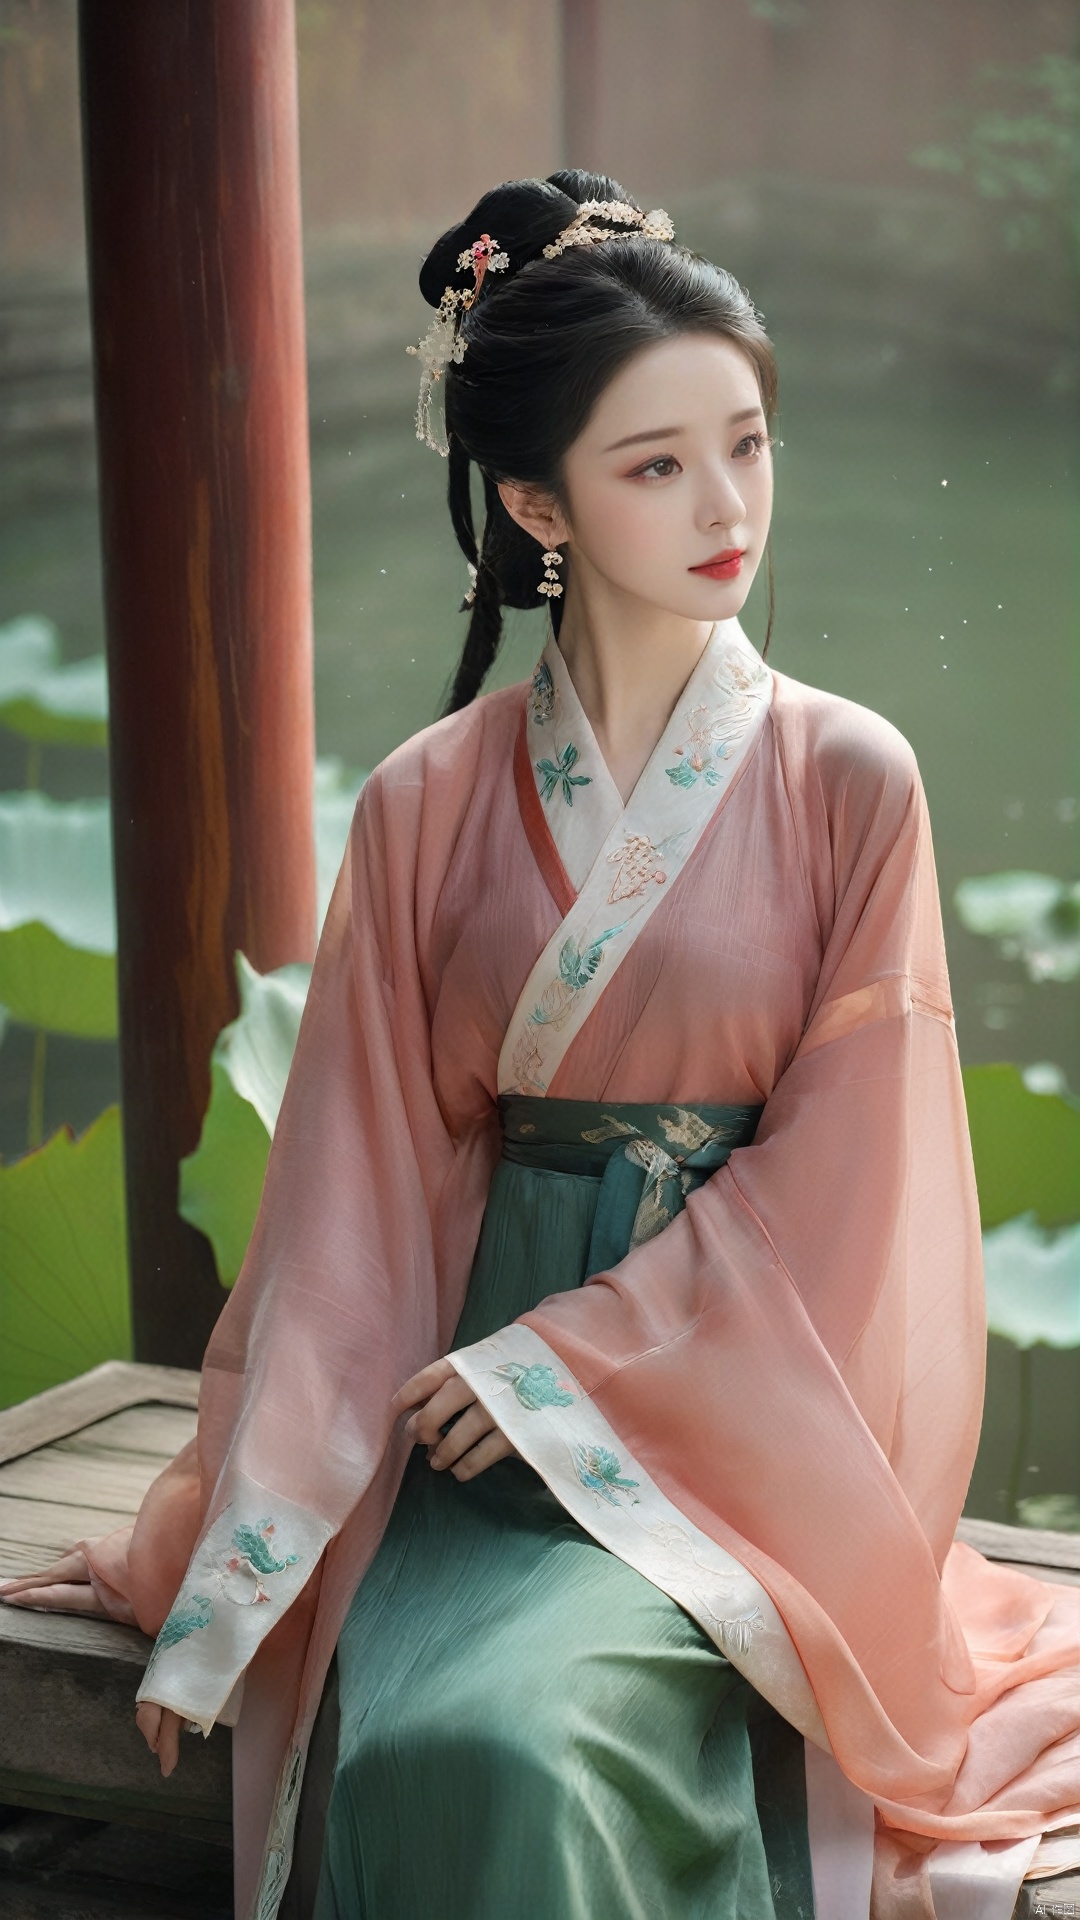  (1girl:1.1), (Lace pink-green skirt:1.39), on Stomach,aqua_earrings,Lights, lanterns, chang,(big breasts:1.56),hanfu, Best quality, Realistic, photorealistic, masterpiece, extremely detailed CG unity 8k wallpaper, best illumination, best shadow, huge filesize ,(huge breasts:1.59) incredibly absurdres, absurdres, looking at viewer, transparent, smog, gauze, vase, petals, room, ancient Chinese style, detailed background, wide shot background,
(((black hair))),(Sitting on the lotus pond porch:1.49) ,(A pond full of pink lotus flowers:1.5),close up of 1girl,Hairpins,hair ornament,hair wings,slim,narrow waist,perfect eyes,beautiful perfect face,pleasant smile,perfect female figure,detailed skin,charming,alluring,seductive,erotic,enchanting,delicate pattern,detailed complex and rich exquisite clothing detail,delicate intricate fabrics,
Morning Serenade In the gentle morning glow, (a woman in a pink lotus-patterned Hanfu stands in an indoor courtyard:1.36),(Chinese traditional dragon and phoenix embroidered Hanfu:1.3), admiring the tranquil garden scenery. The lotus-patterned Hanfu, embellished with silver-thread embroidery, is softly illuminated by the morning light. The light mint green Hanfu imparts a sense of calm and freshness, adorned with delicate lotus patterns, with a blurred background to enhance the peaceful atmosphere, song_hanfu, tang_hanfu, qinhan_hanfu, ming_hanfu